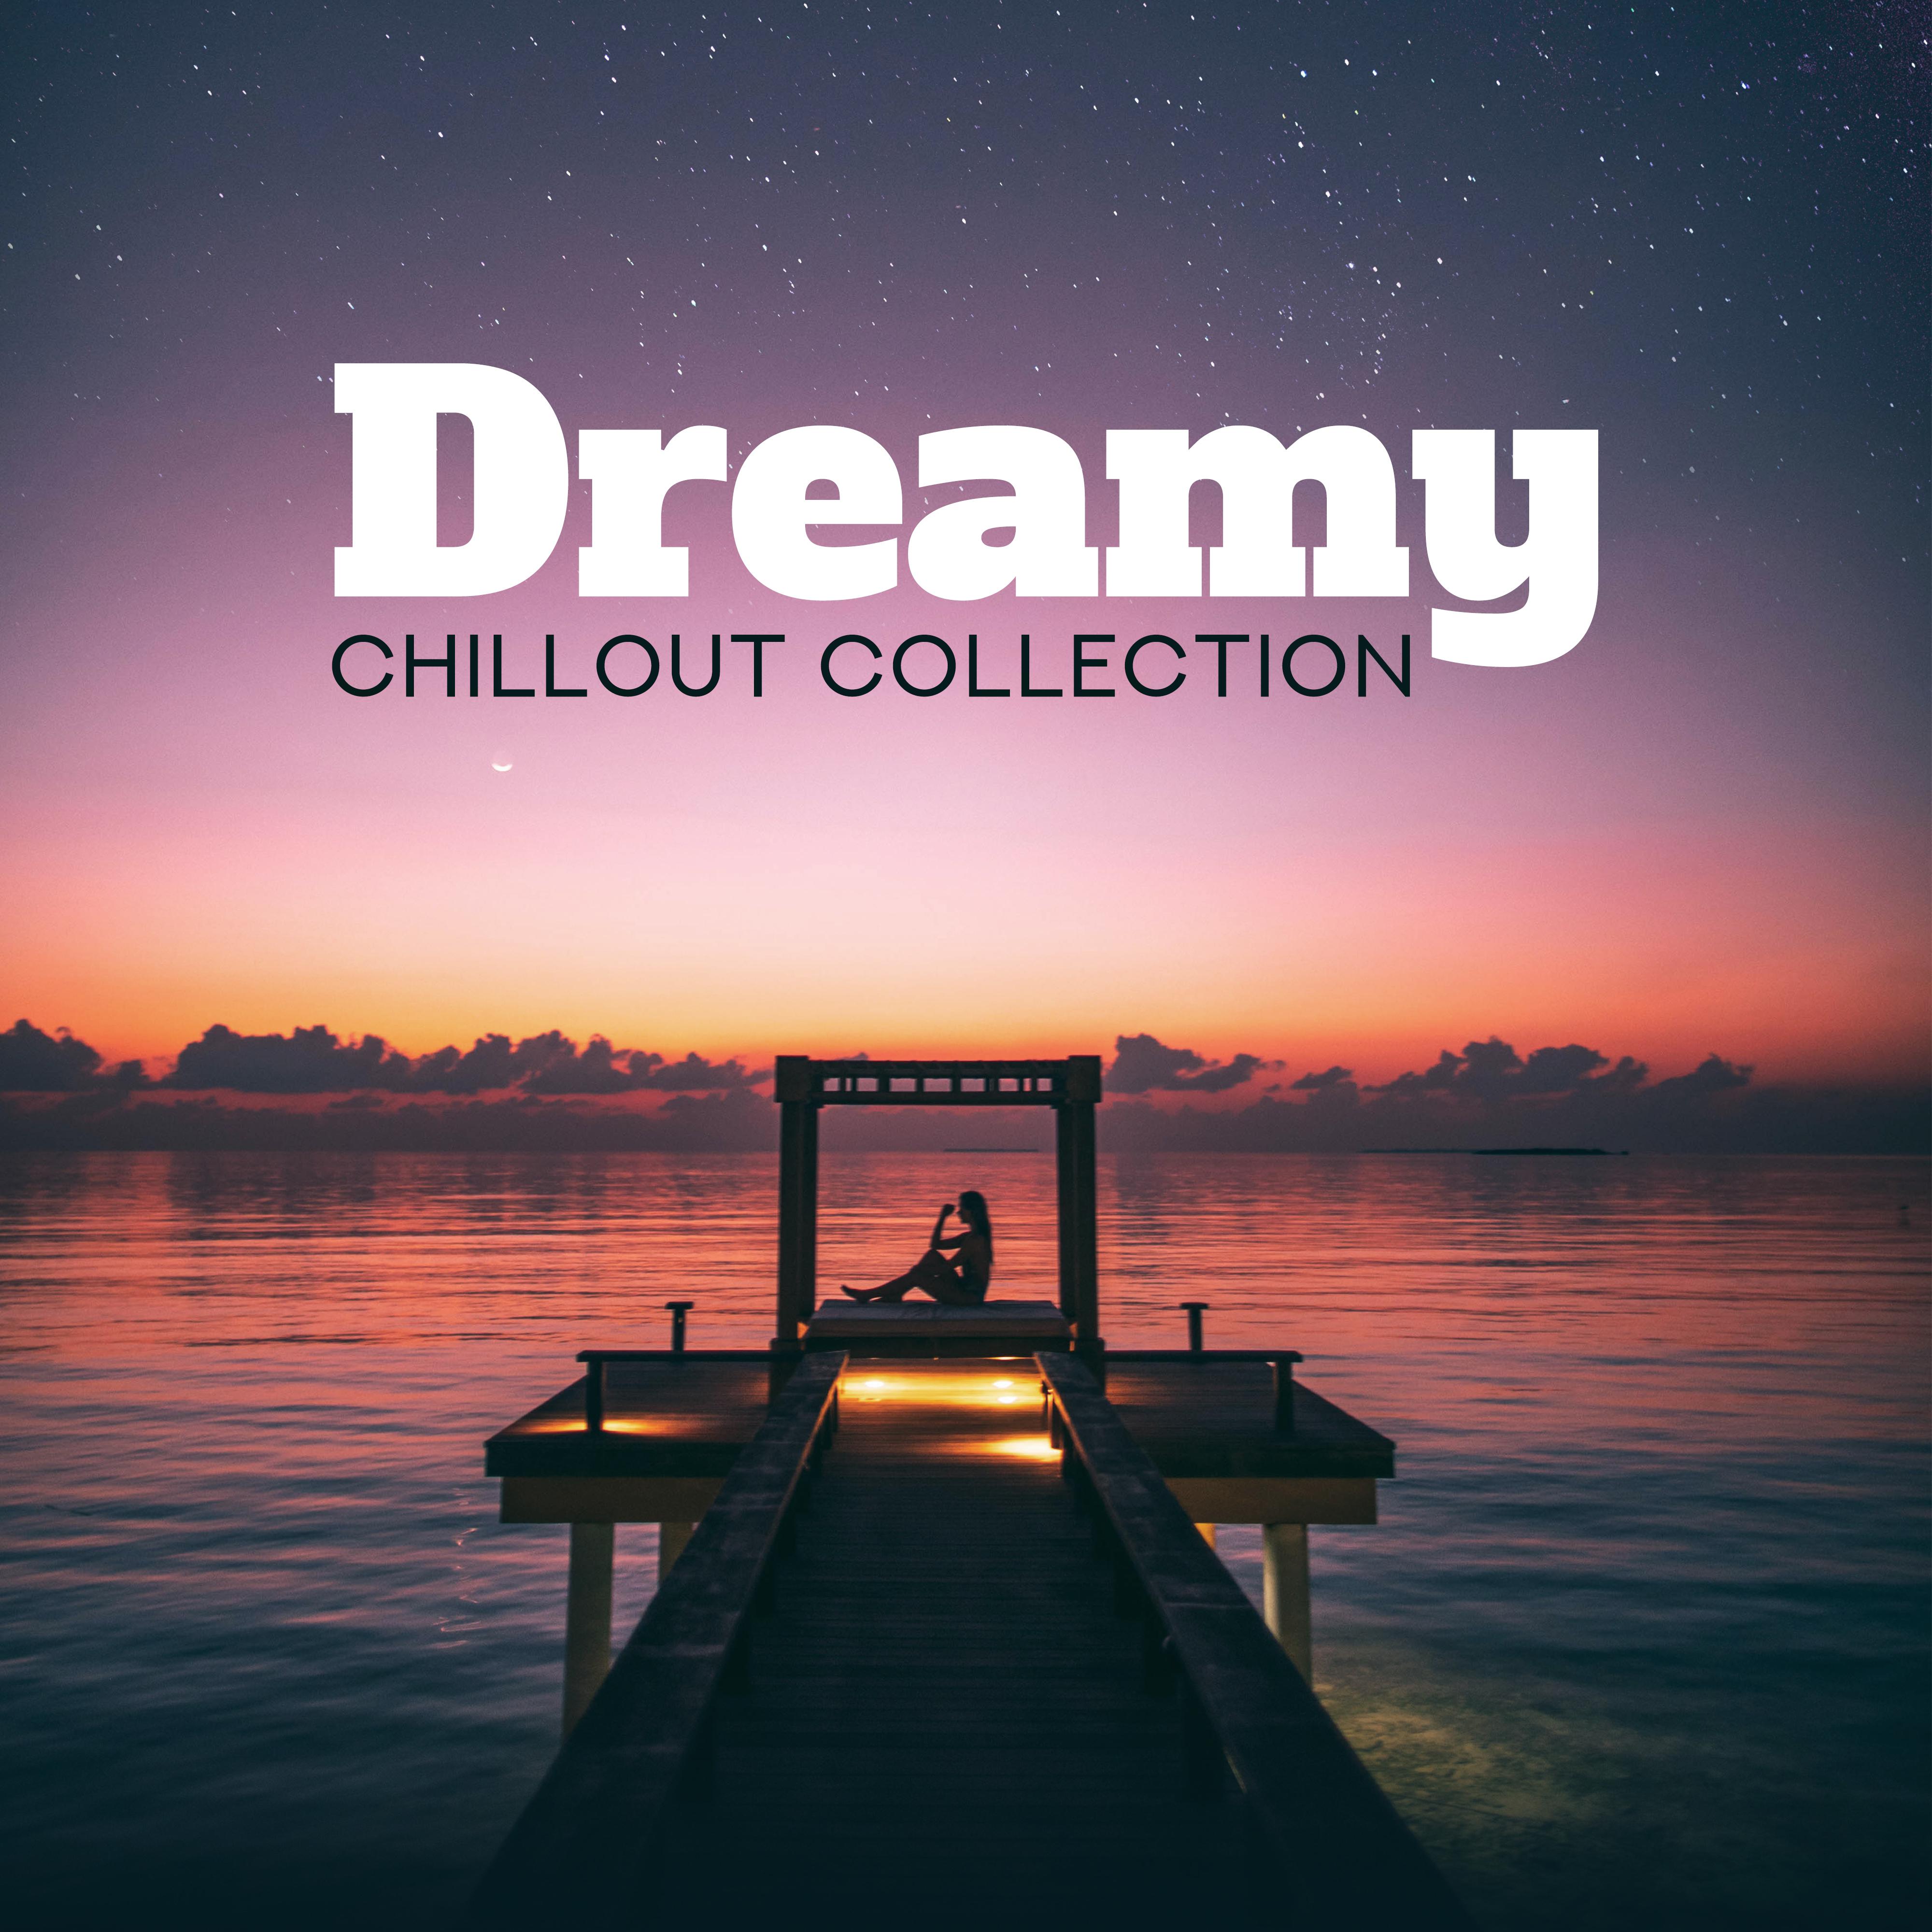 Dreamy Chillout Collection: 15 Songs Perfect for Sleeping, Deep Relaxation and Calming Down